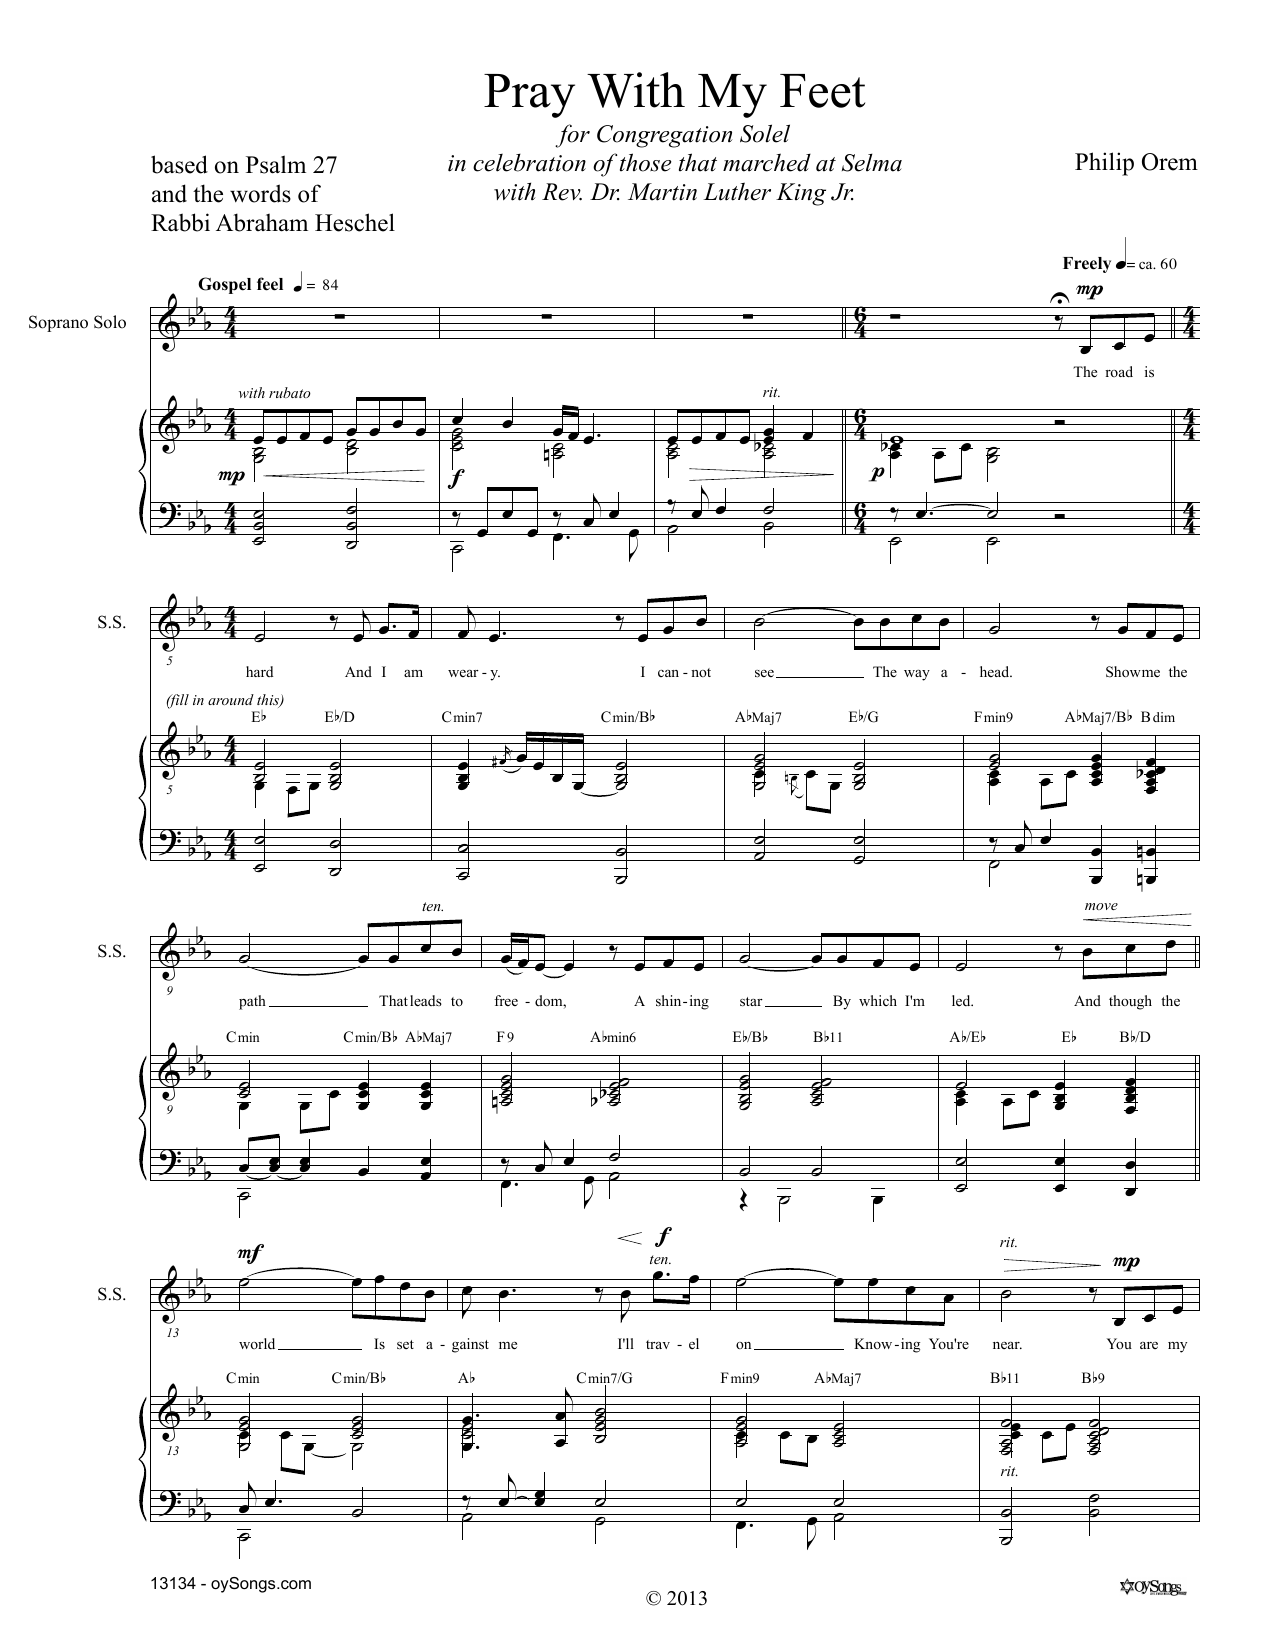 Download Philip Orem Pray With My Feet Sheet Music